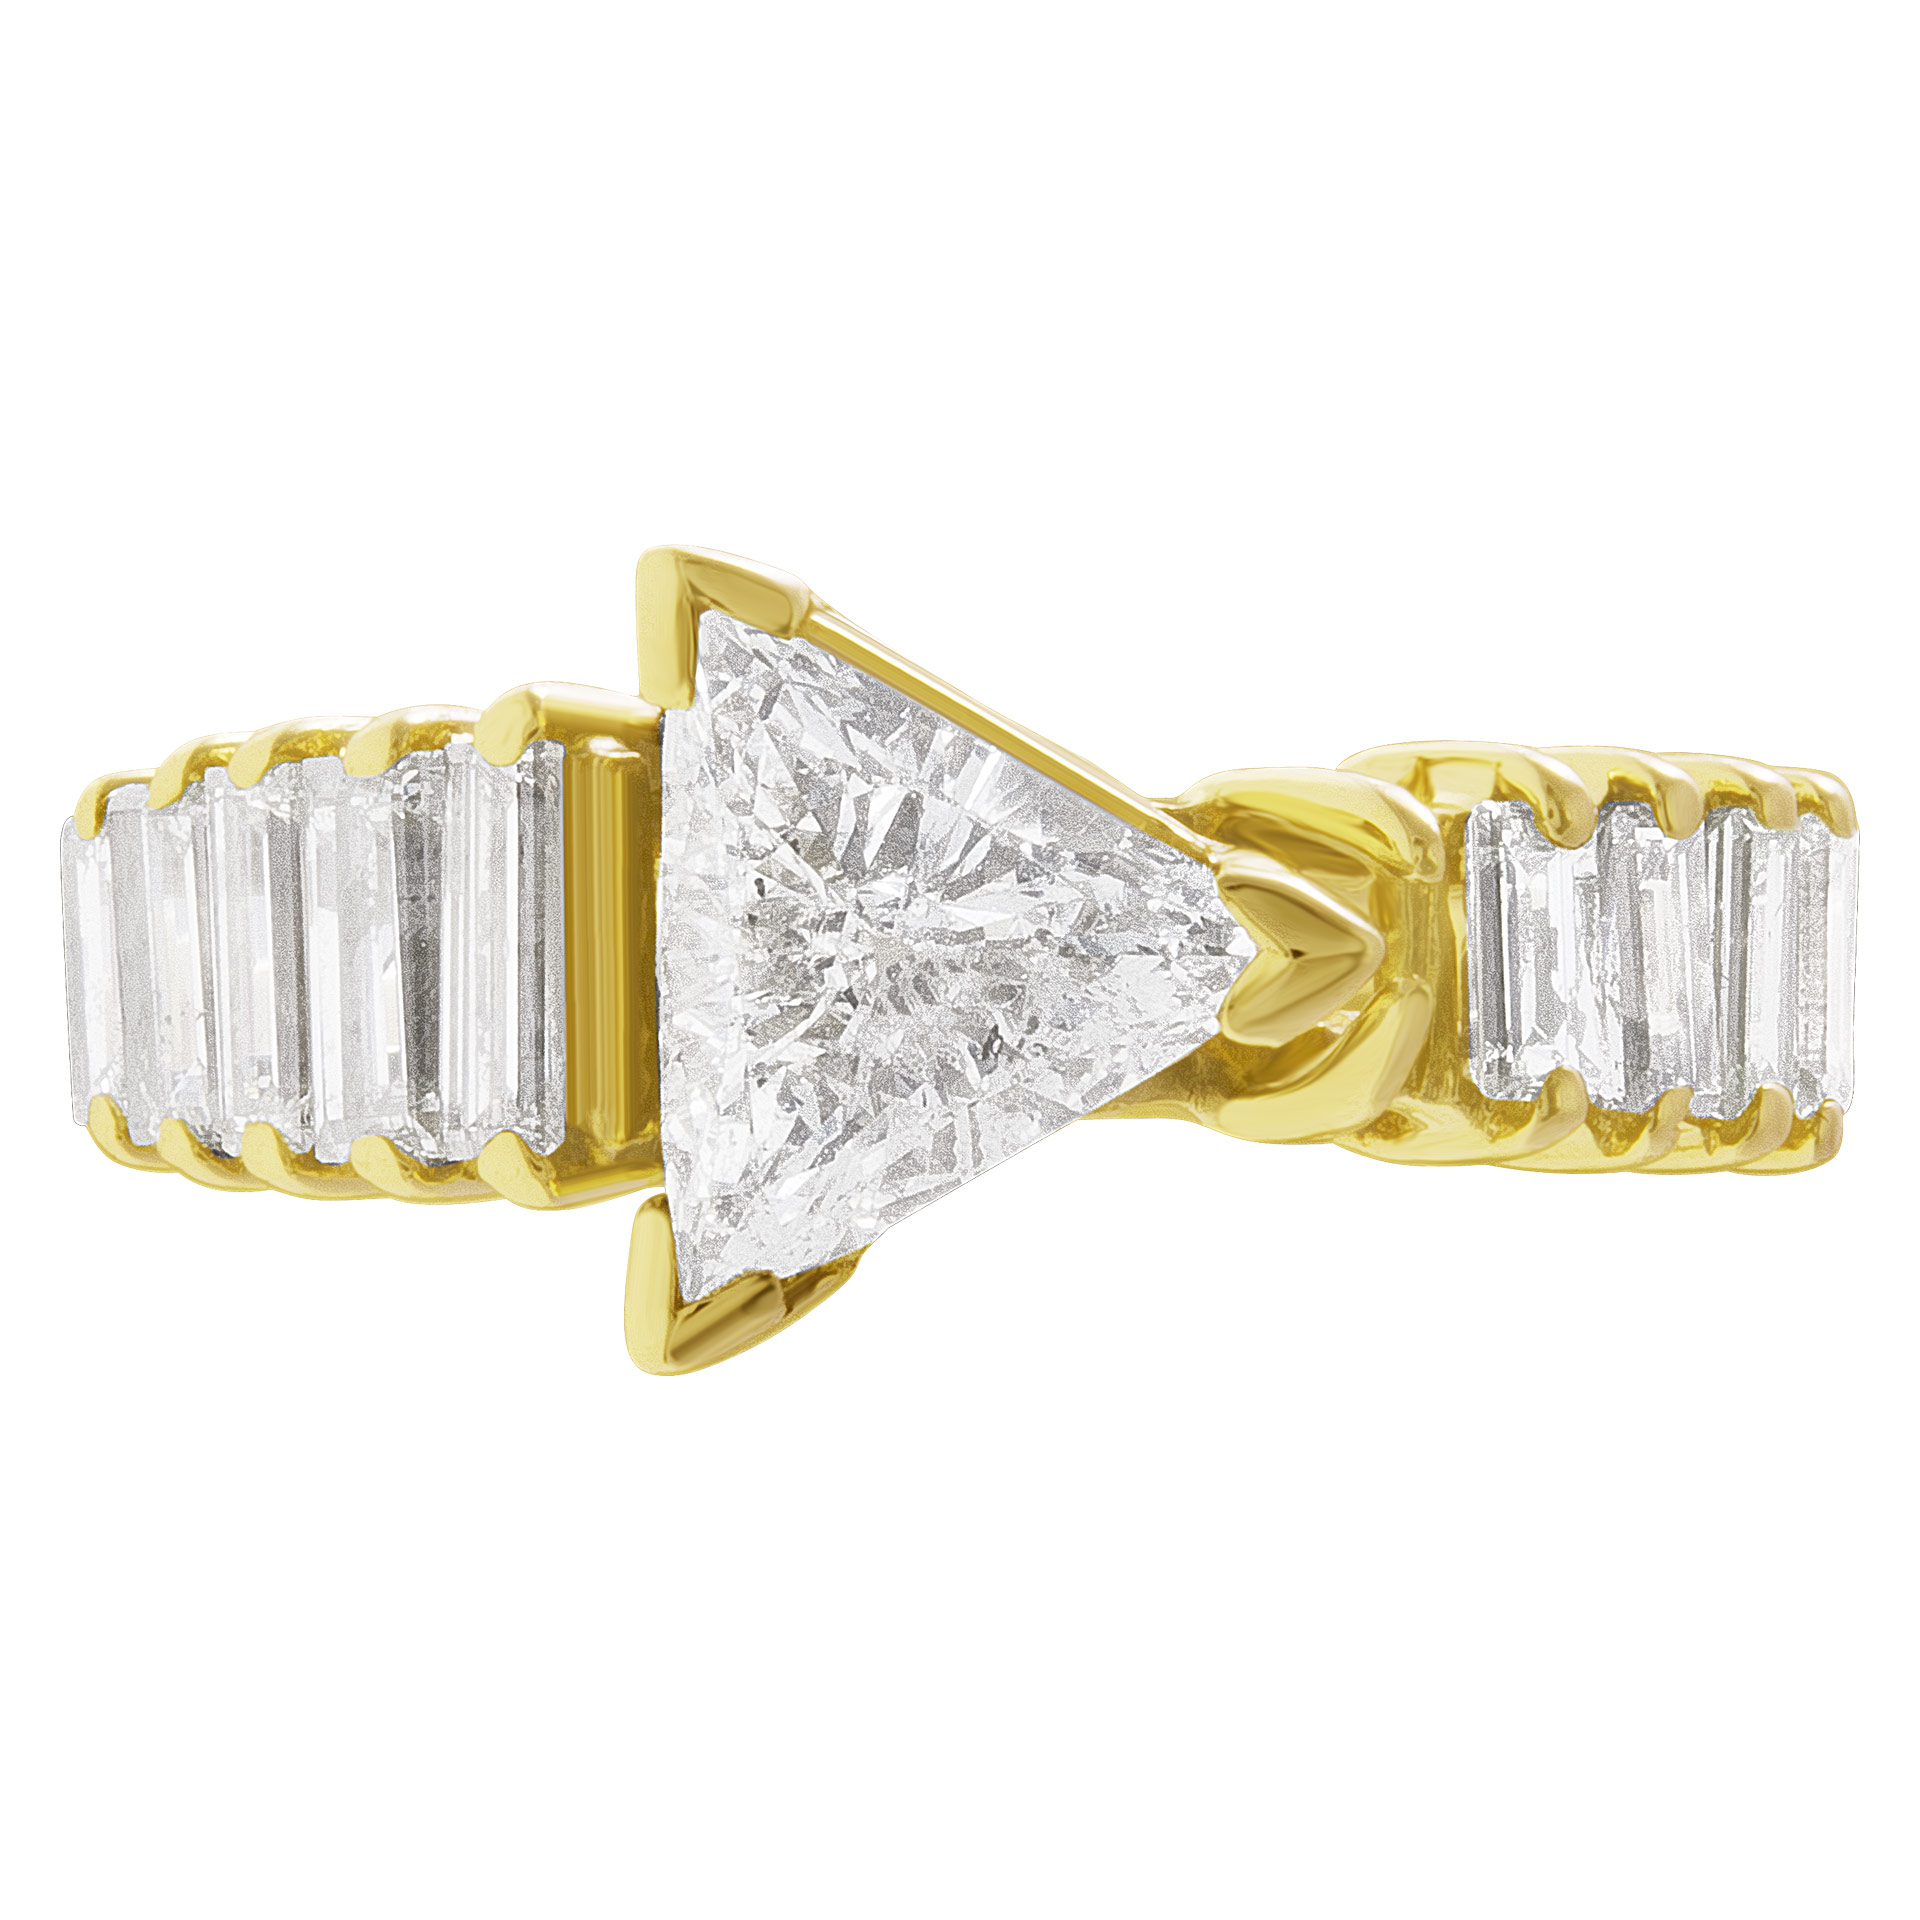 GIA Certified modified triangular brillian cut diamond 1.03 ct (H color, I1 clarity) ring set in 14k yellow gold. image 1